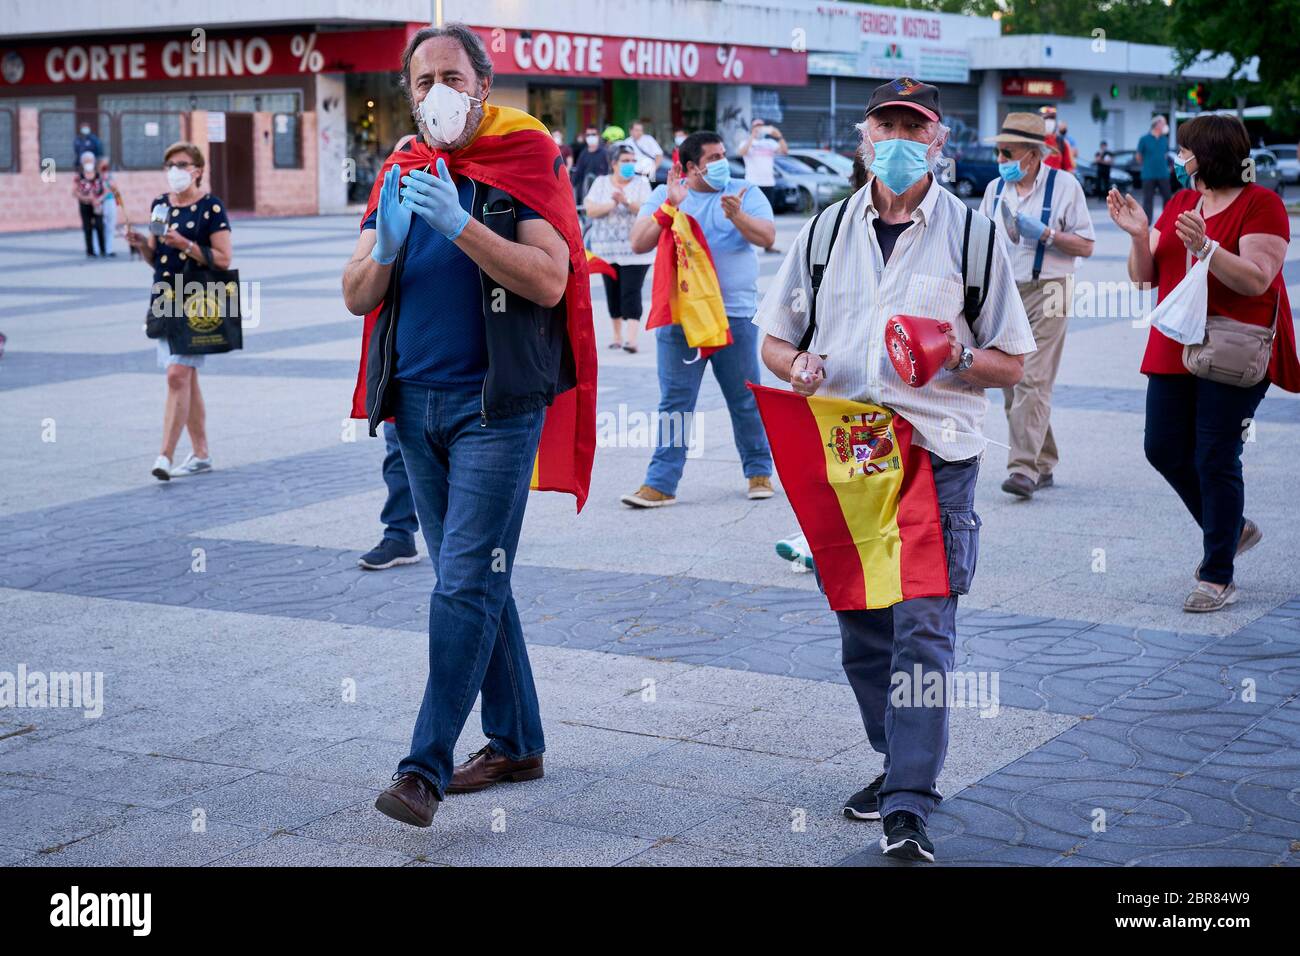 Mostoles, Madrid, Spain. 20th May, 2020. Protesters wearing Spanish flags  during the protest against the government's handling of the coronavirus  crisis in Mostoles, near Madrid, Spain. Credit: Angel Perez/ZUMA Wire/Alamy  Live News